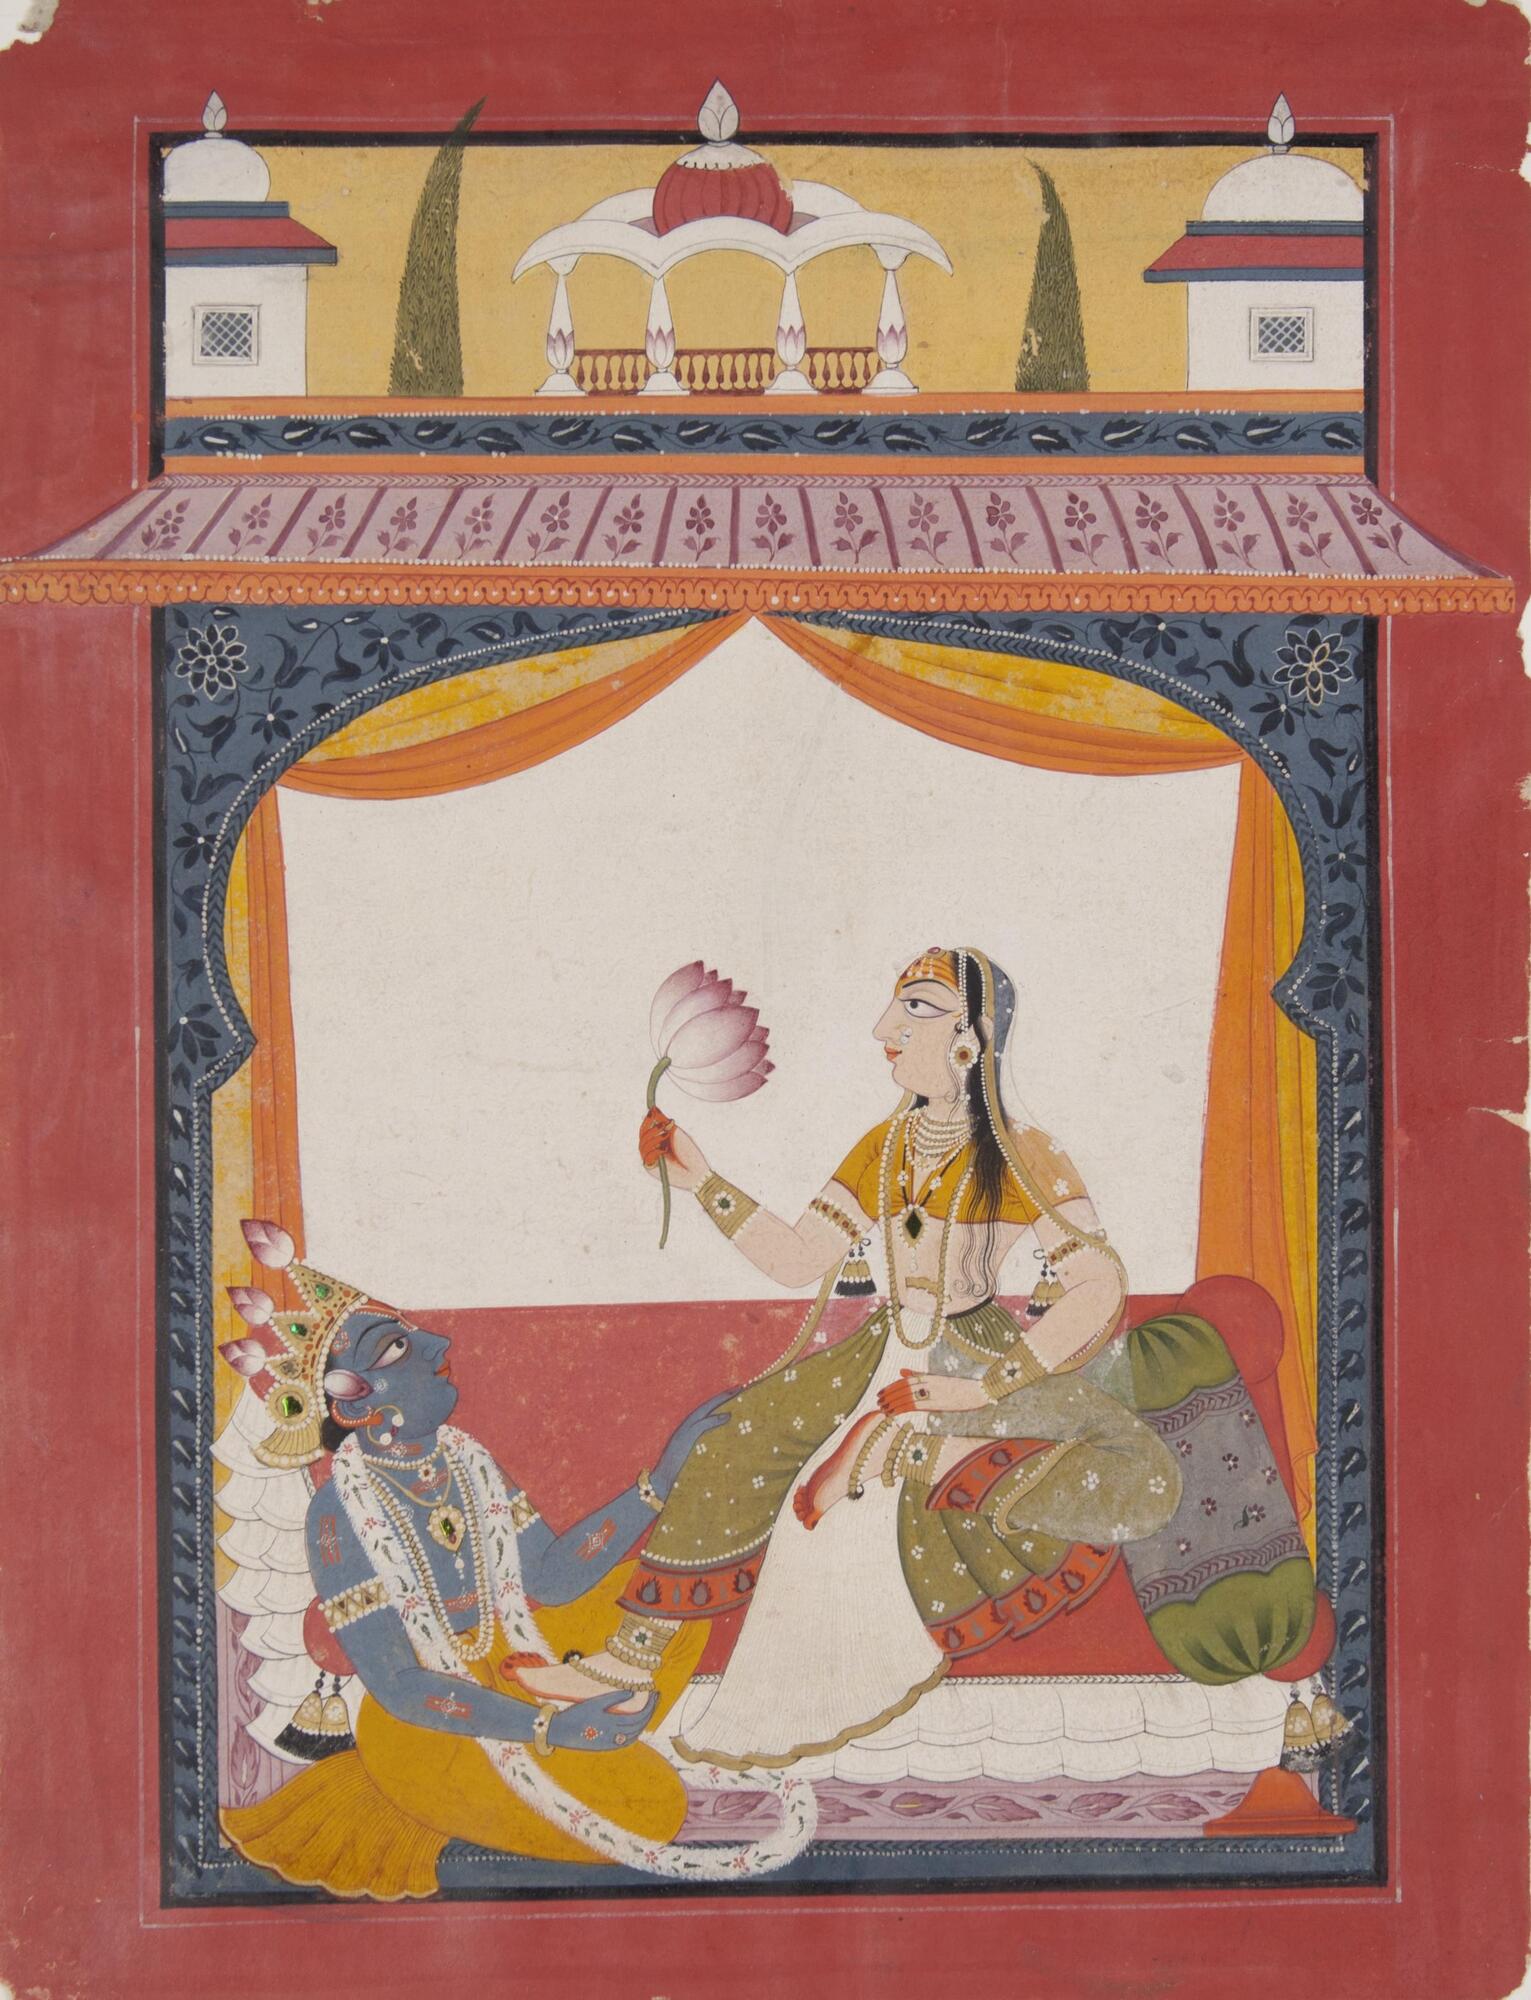 Bold colors depict Krishna, one of human manifestations of the Hindu god Vishnu, is seated with a woman, Radha, above him. He touches her leg, and the tips of her hands and feet glow red. She sits erect and holds a large flower, looking straight off the left edge of the picture. The two are framed in an architectural structure.